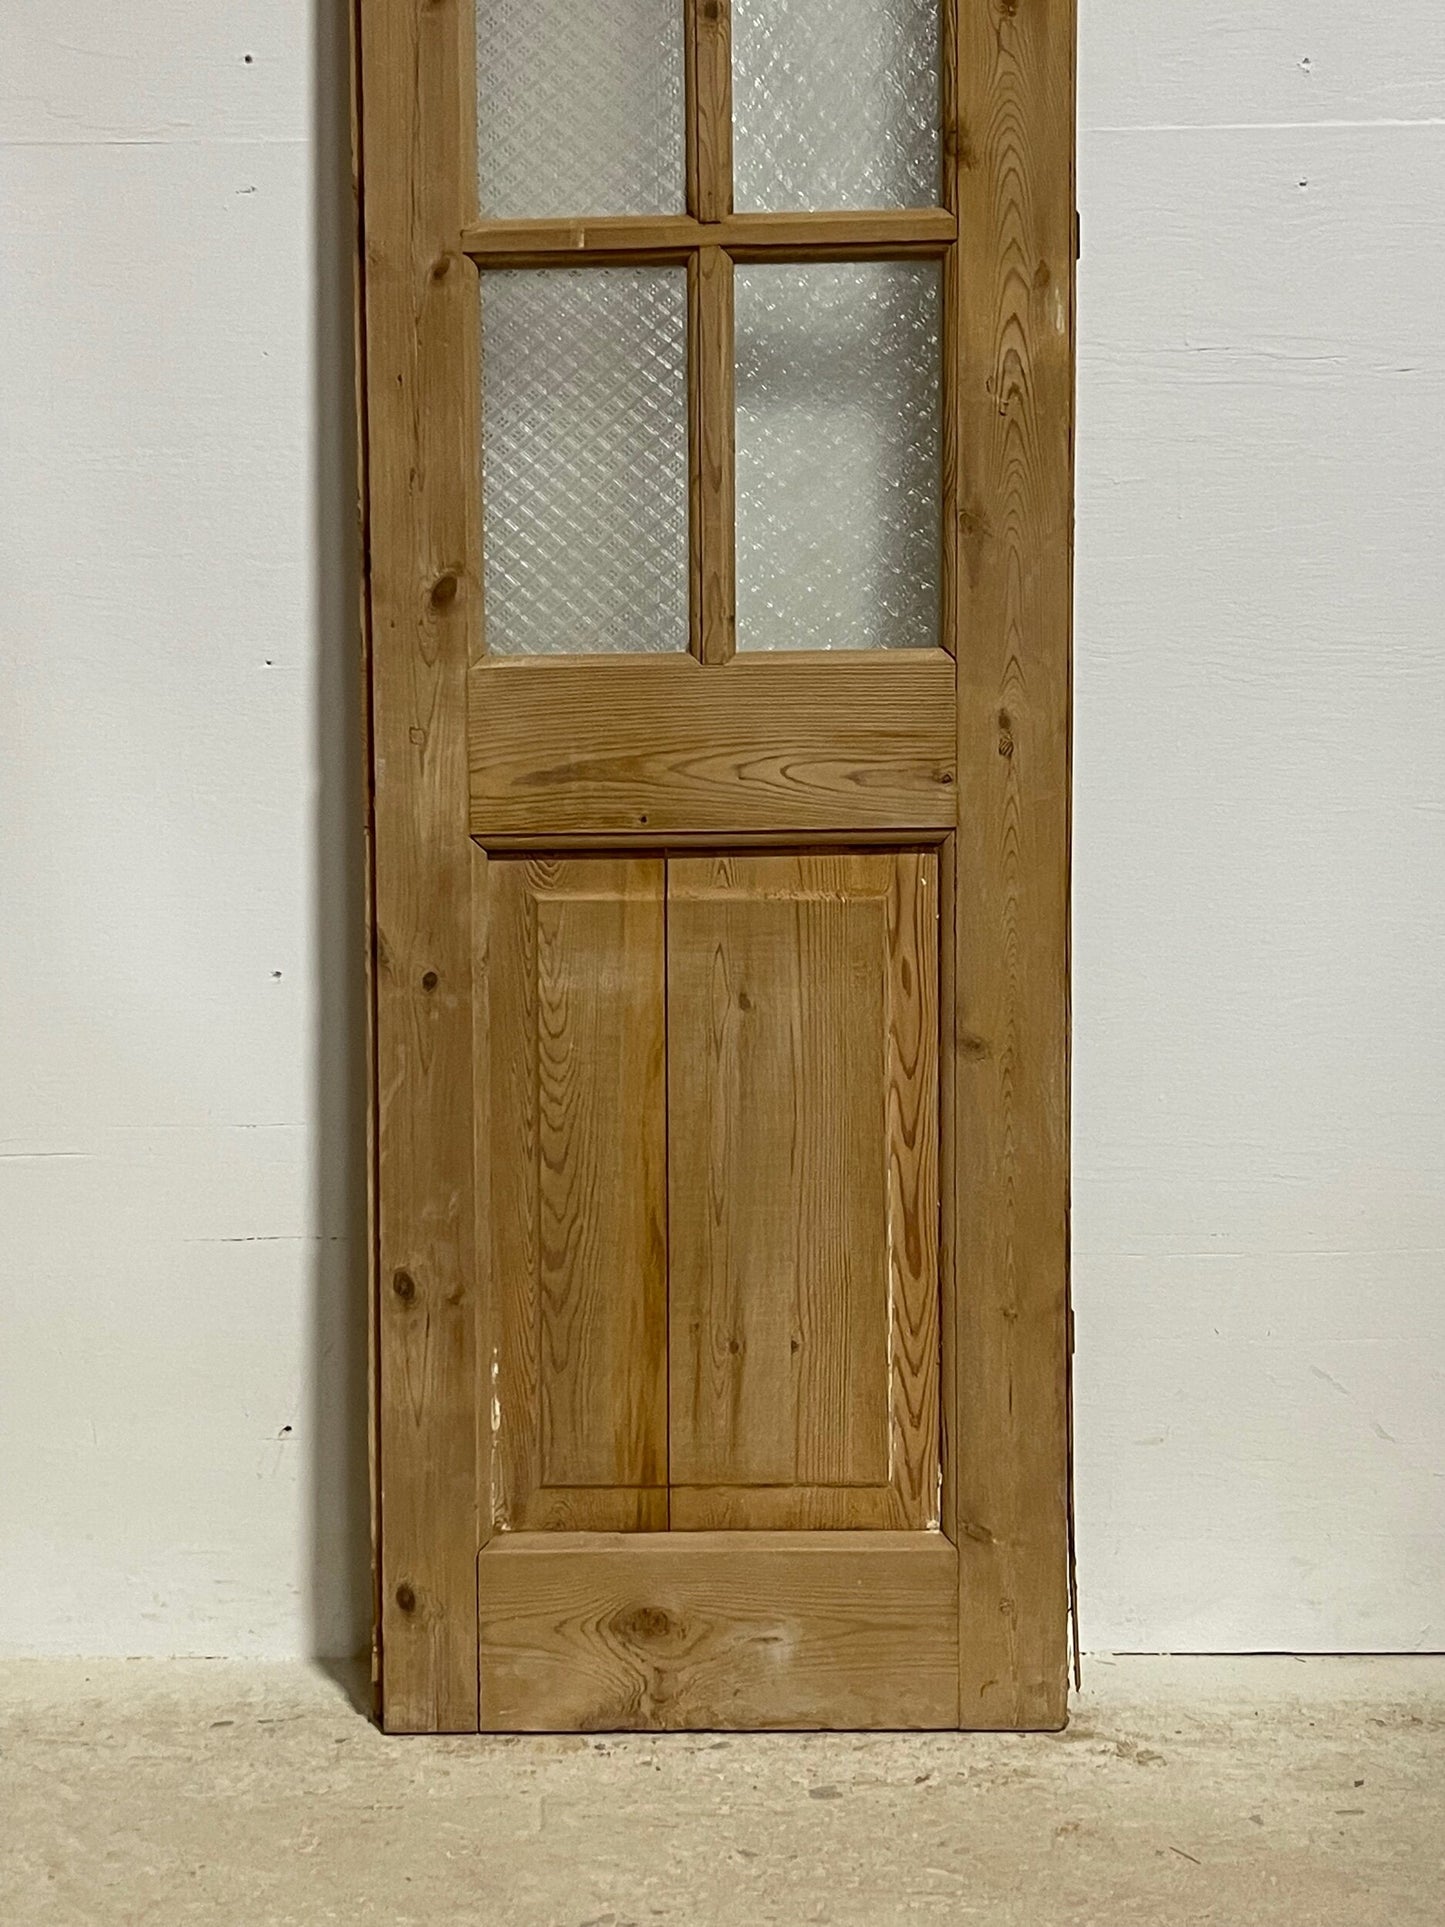 Antique French doors with glass (85x21.25) H0250s